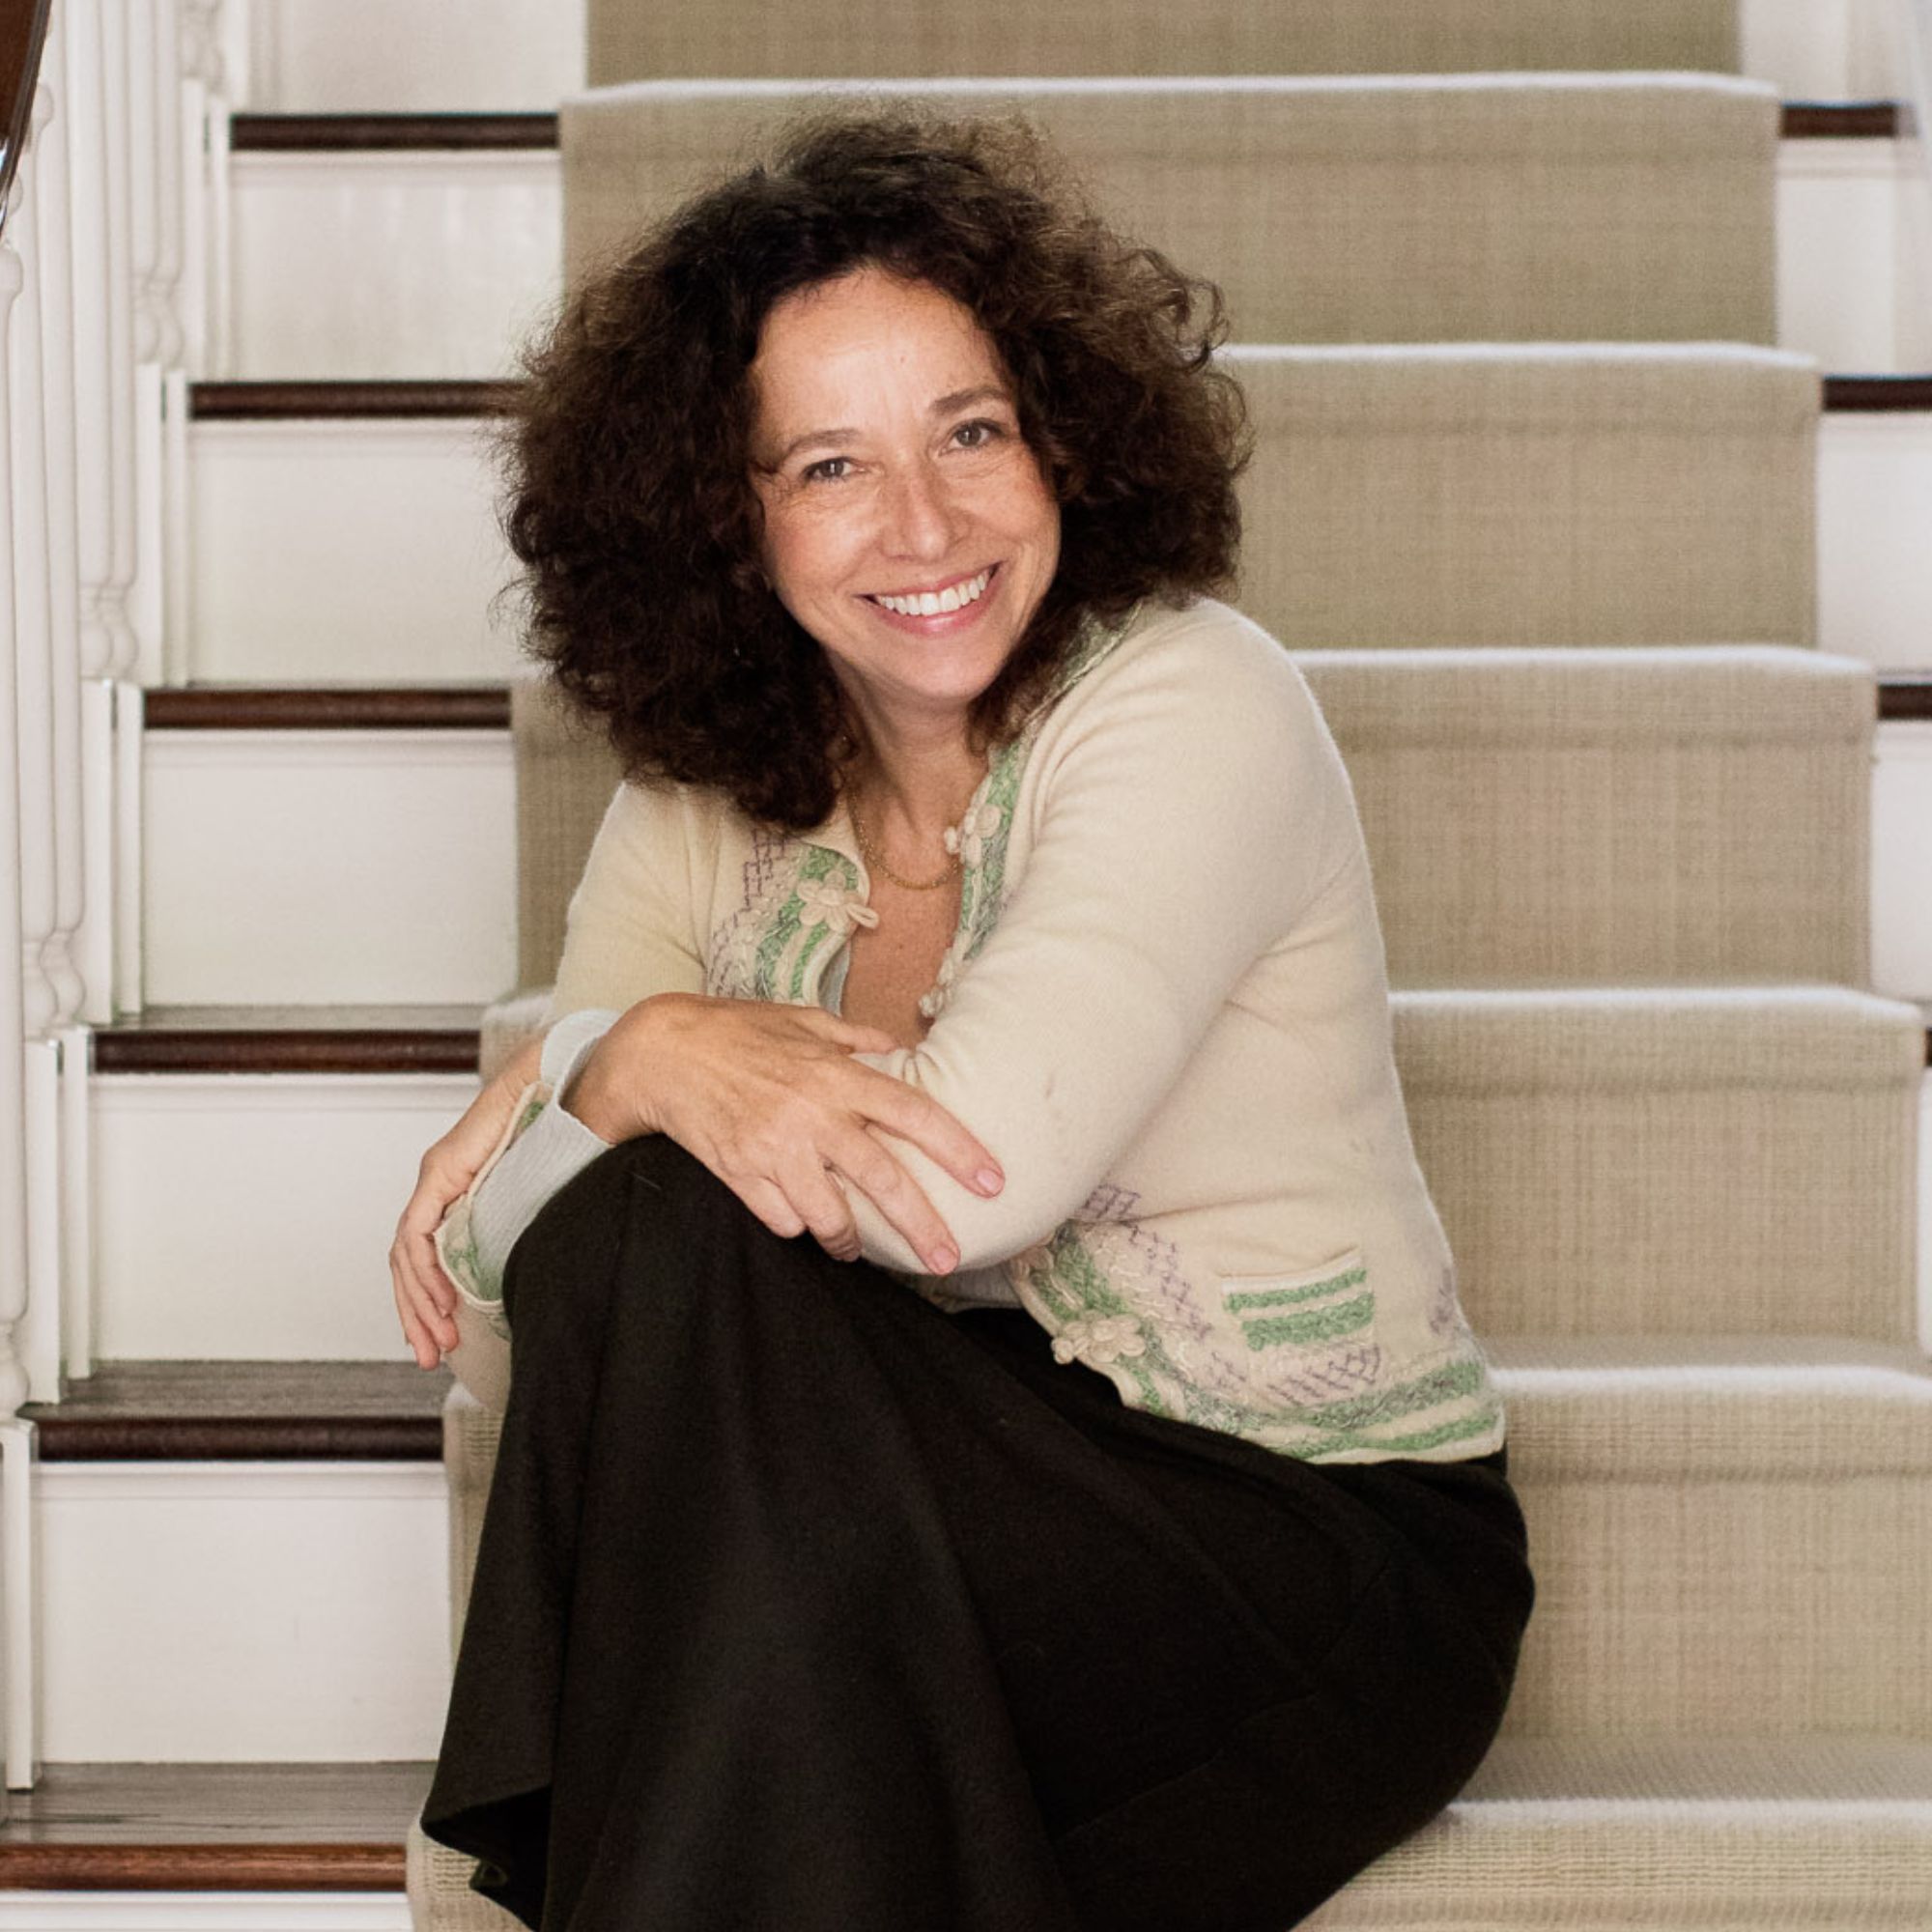 A picture of Amalia Gal, a woman with dark brown frizzy hair wearing a beige top and black skirt sitting on white steps with a beige runner rug in the middle of it